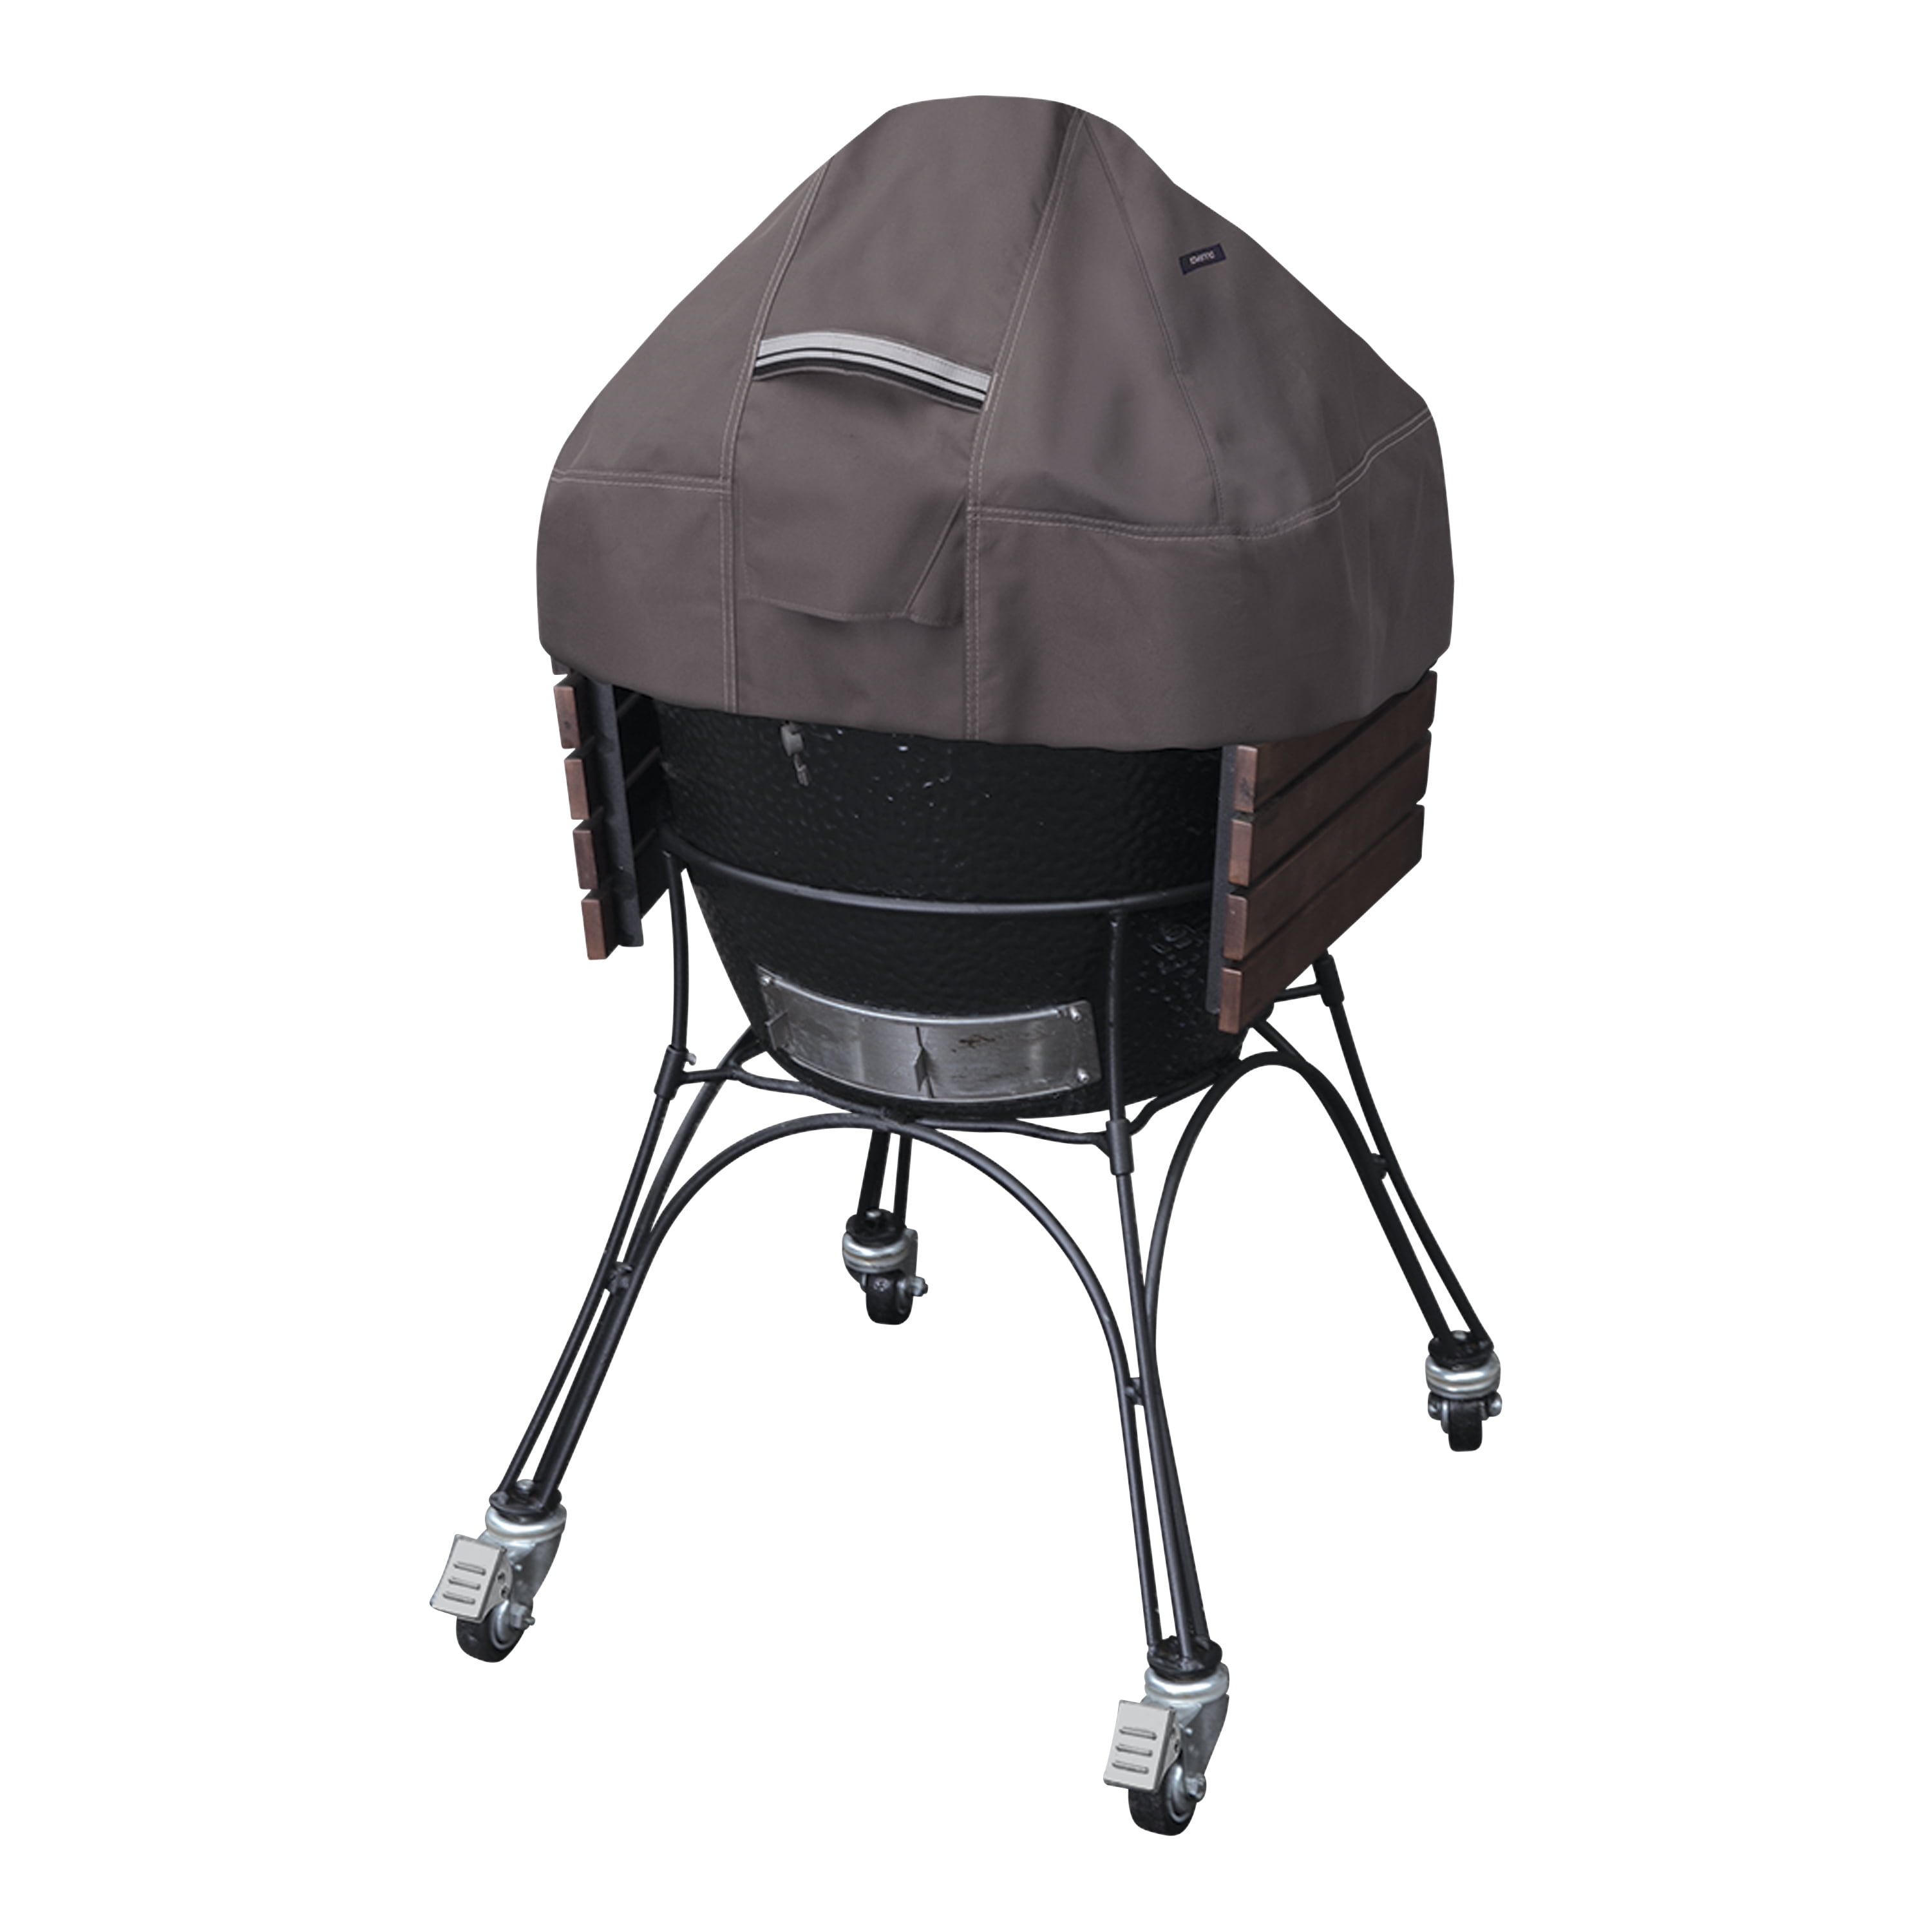 Classic Accessories Hickory Water-Resistant Kamado Ceramic Grill Cover 